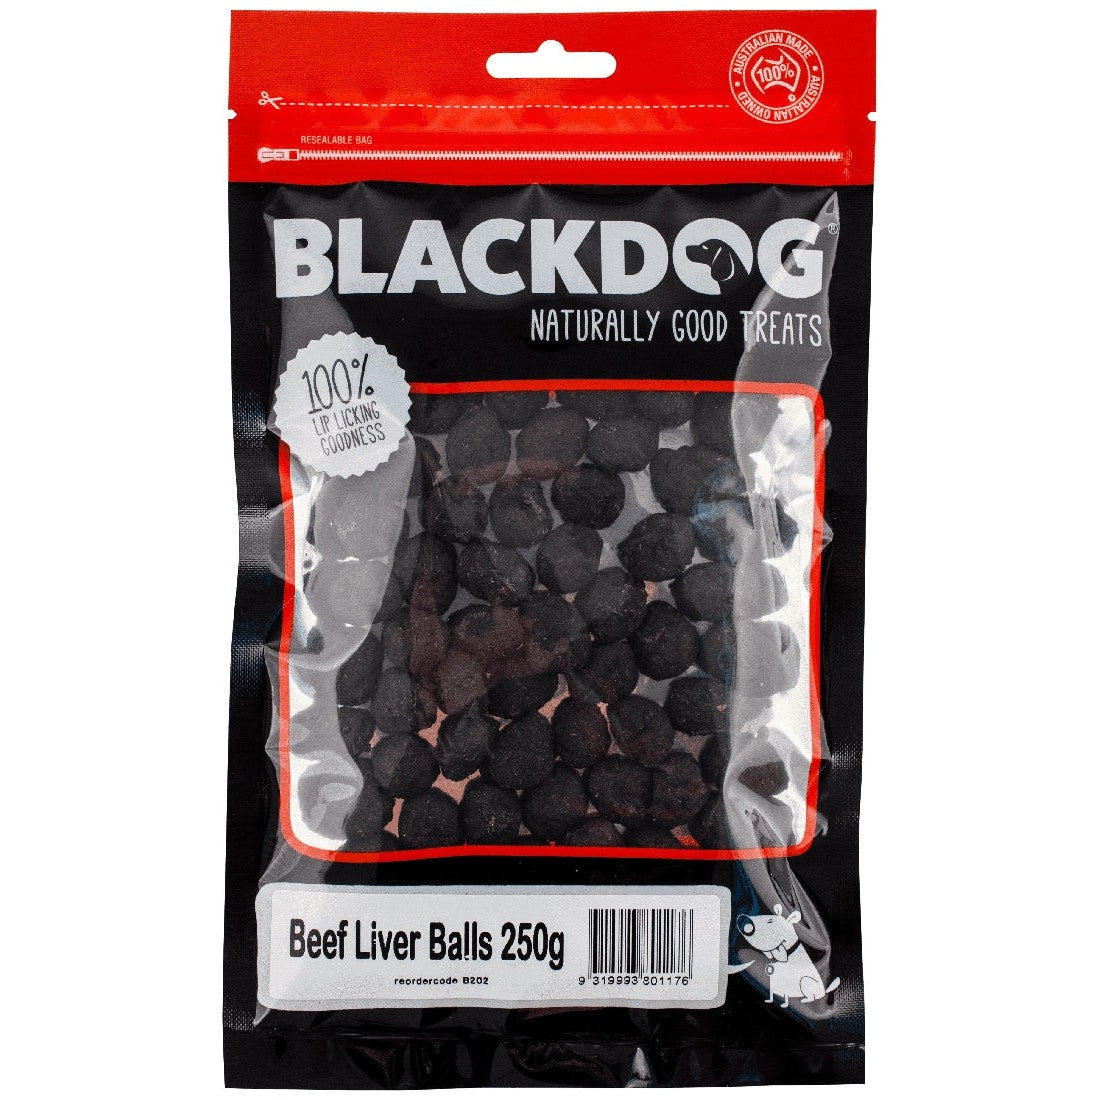 Blackdog Beef Liver Balls dog treats in a resealable 250g package.